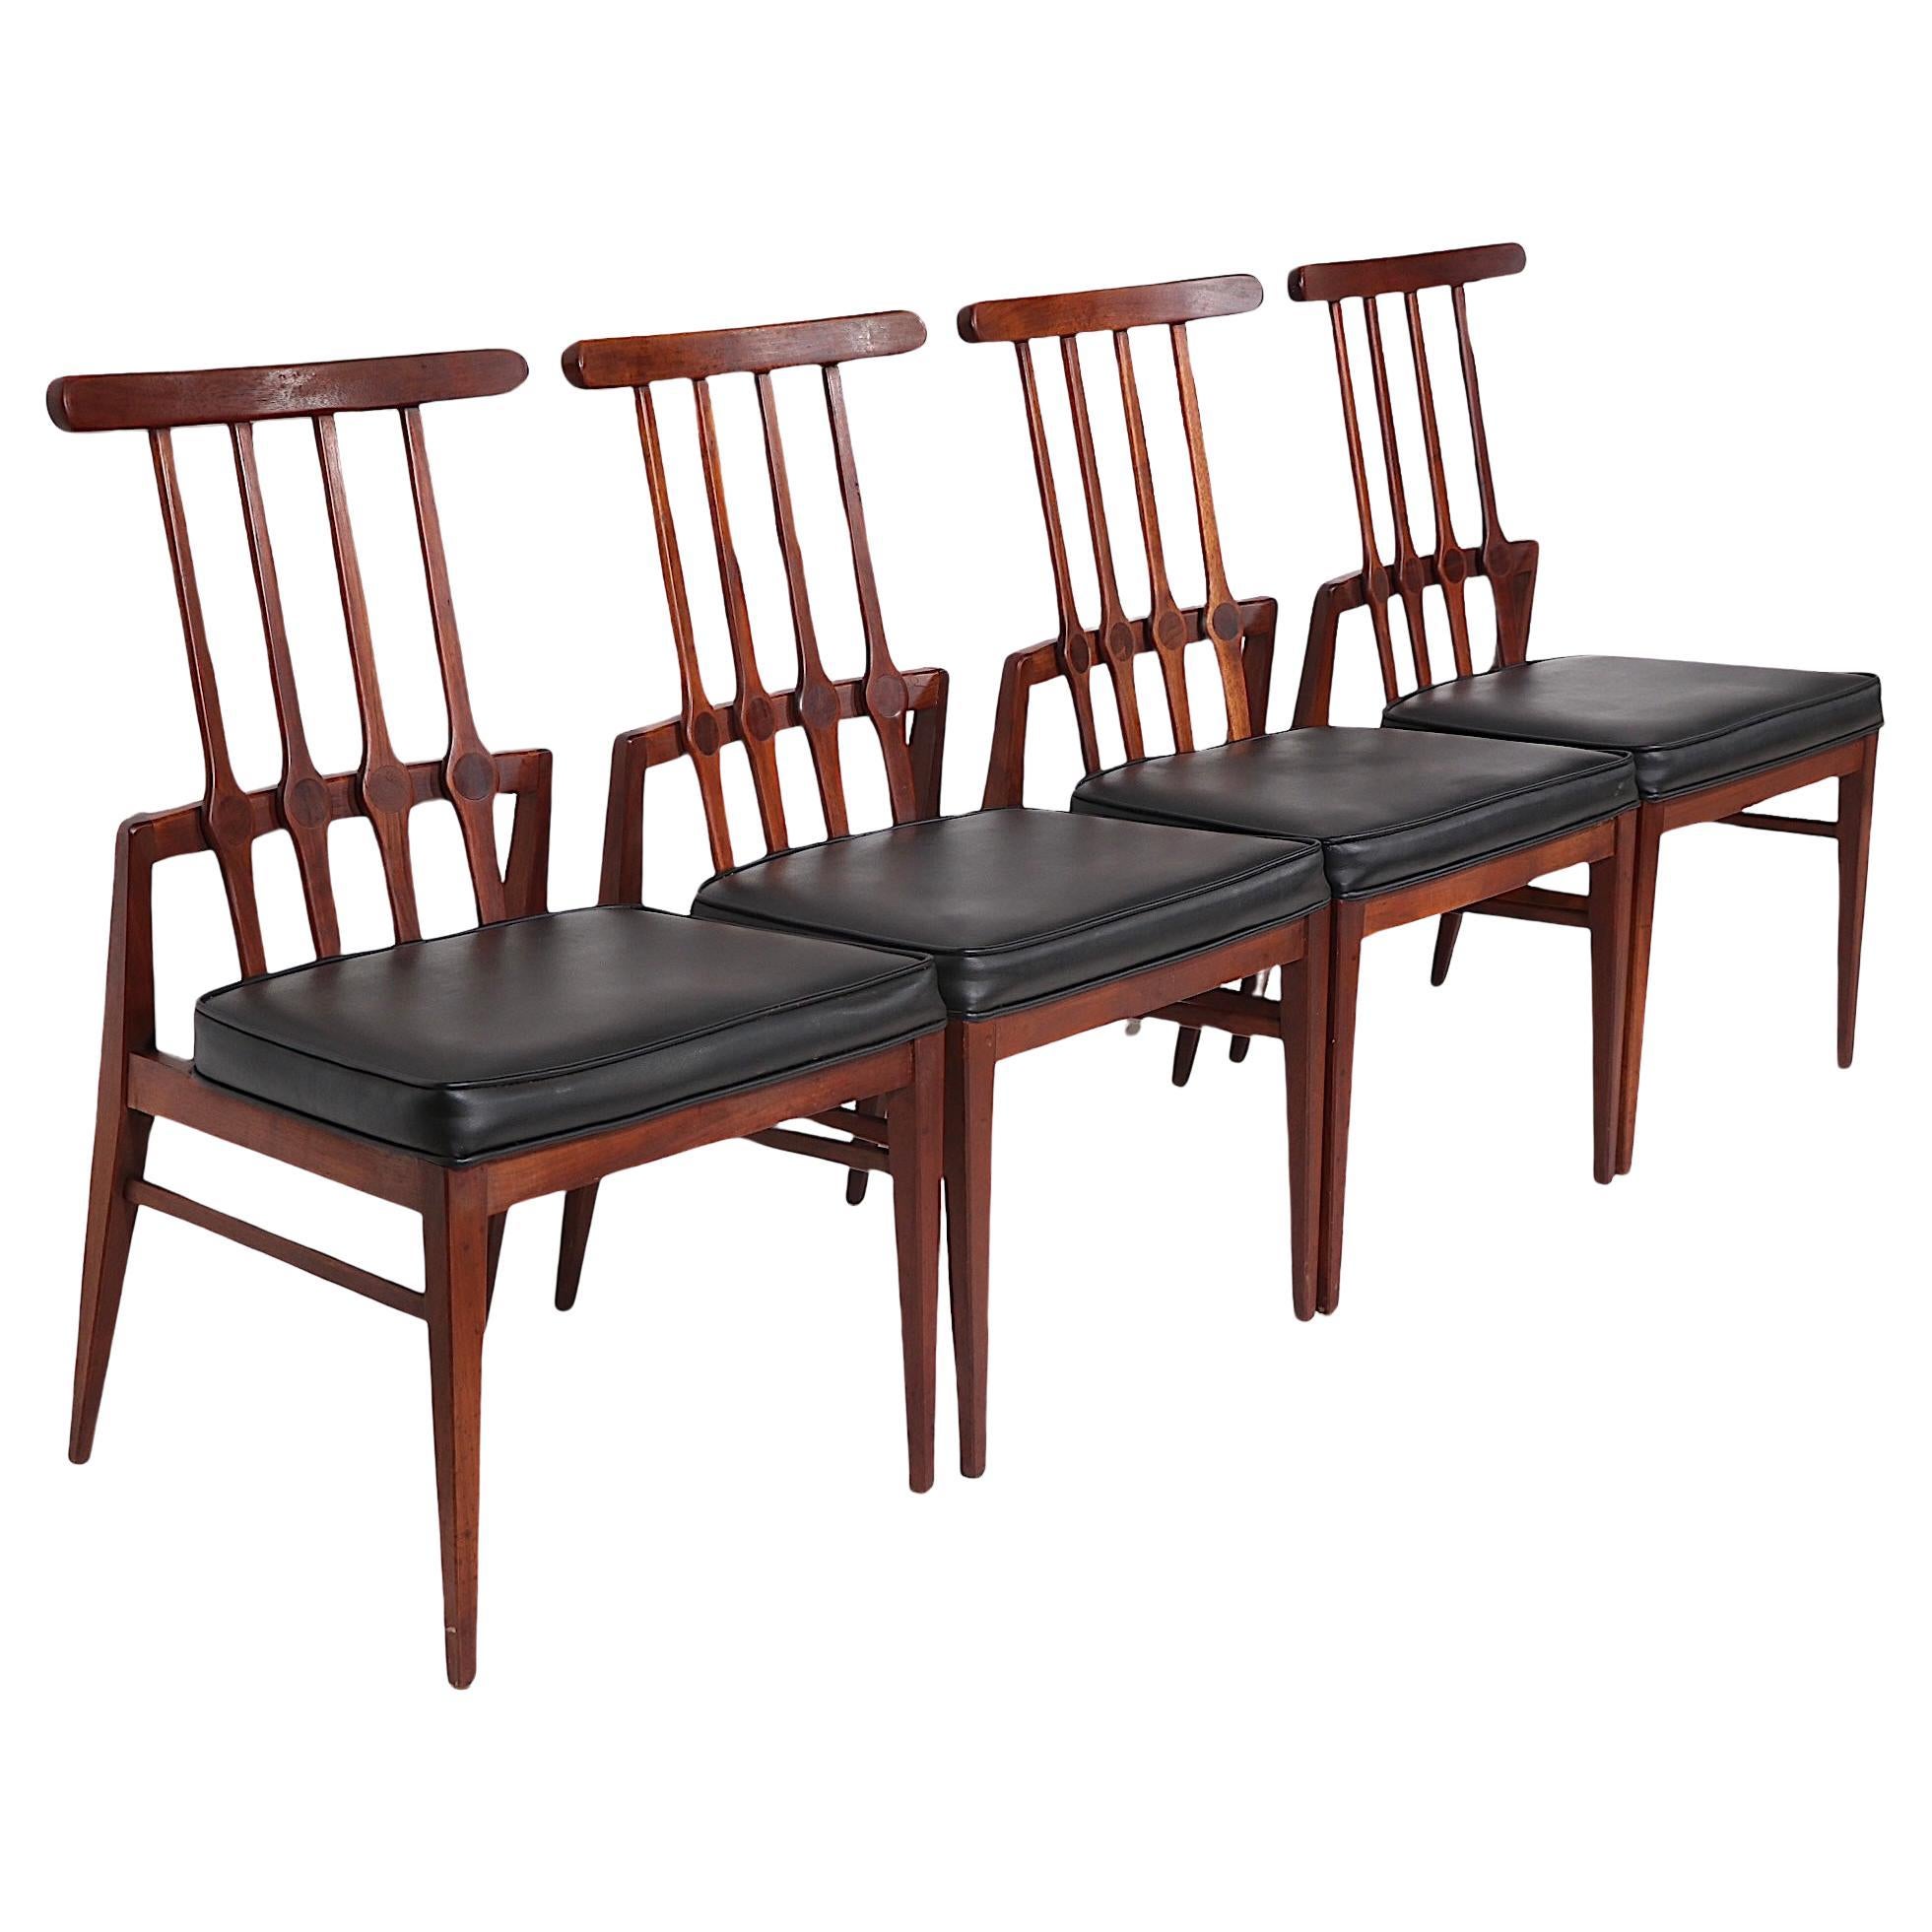 Set of Four Mid Century Dining Chairs by Foster - McDavid c 1950/1960's  For Sale